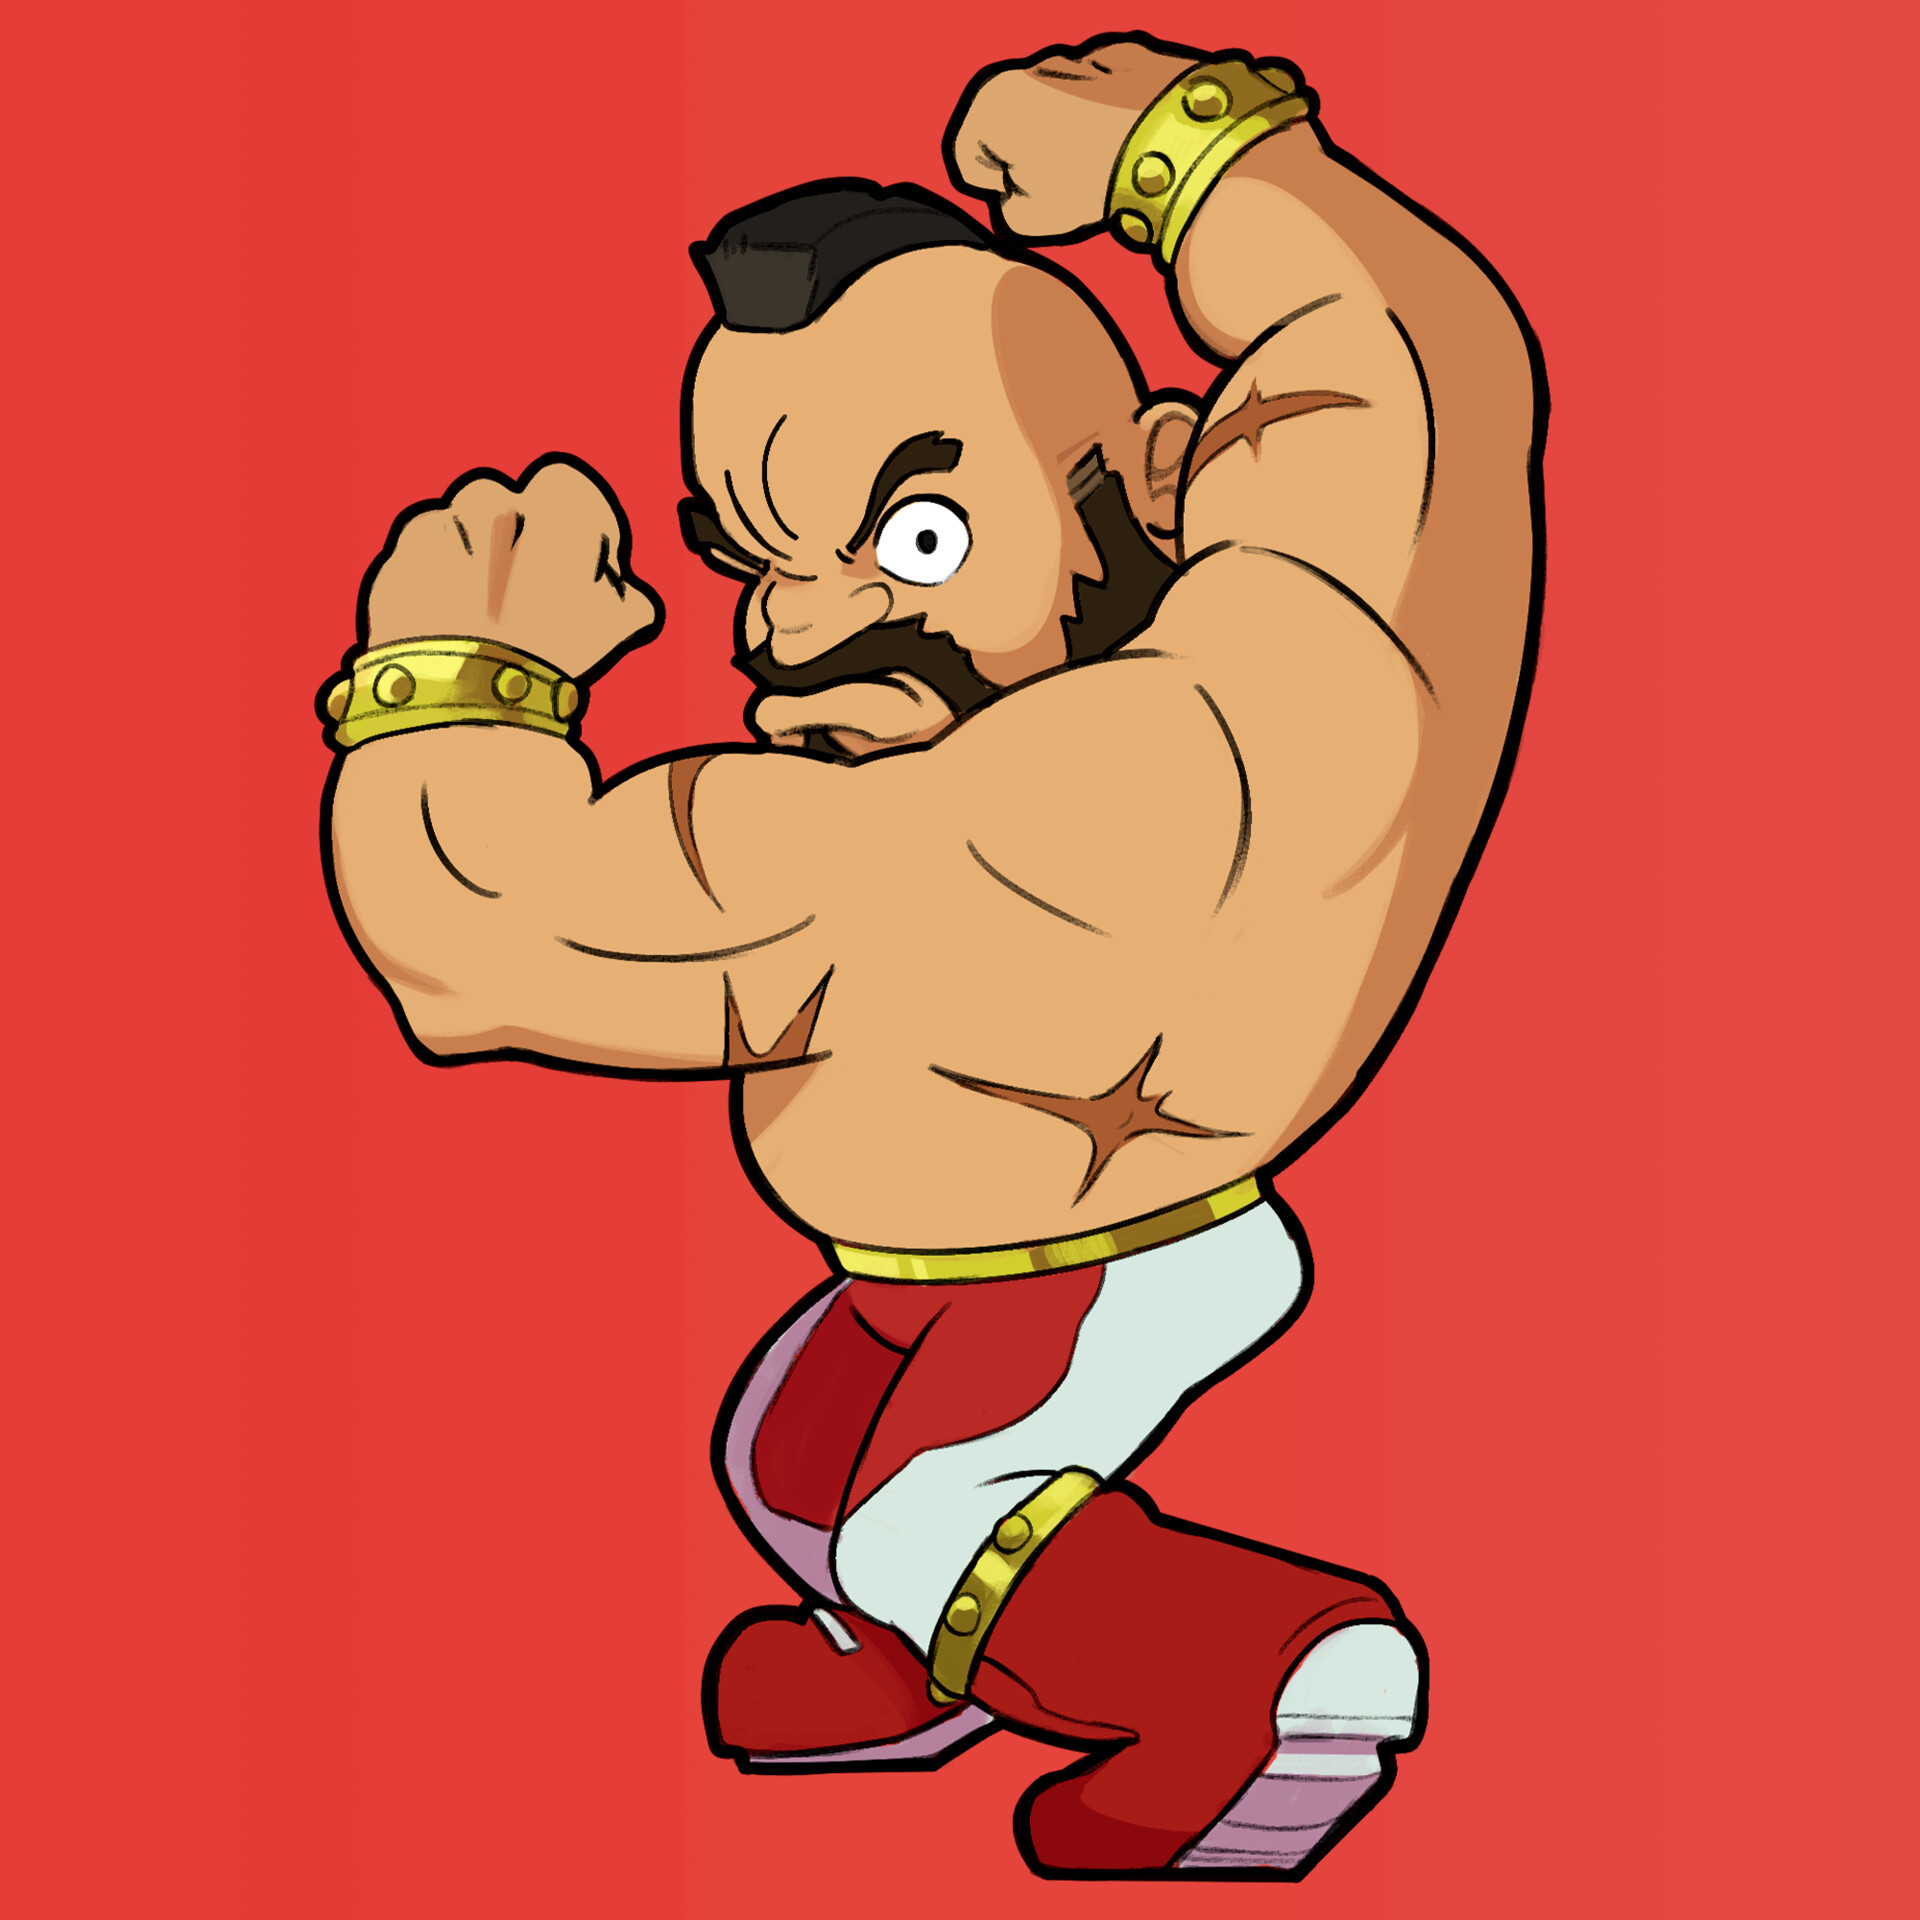 SF6 - Zangief #10 by NgTDat on DeviantArt